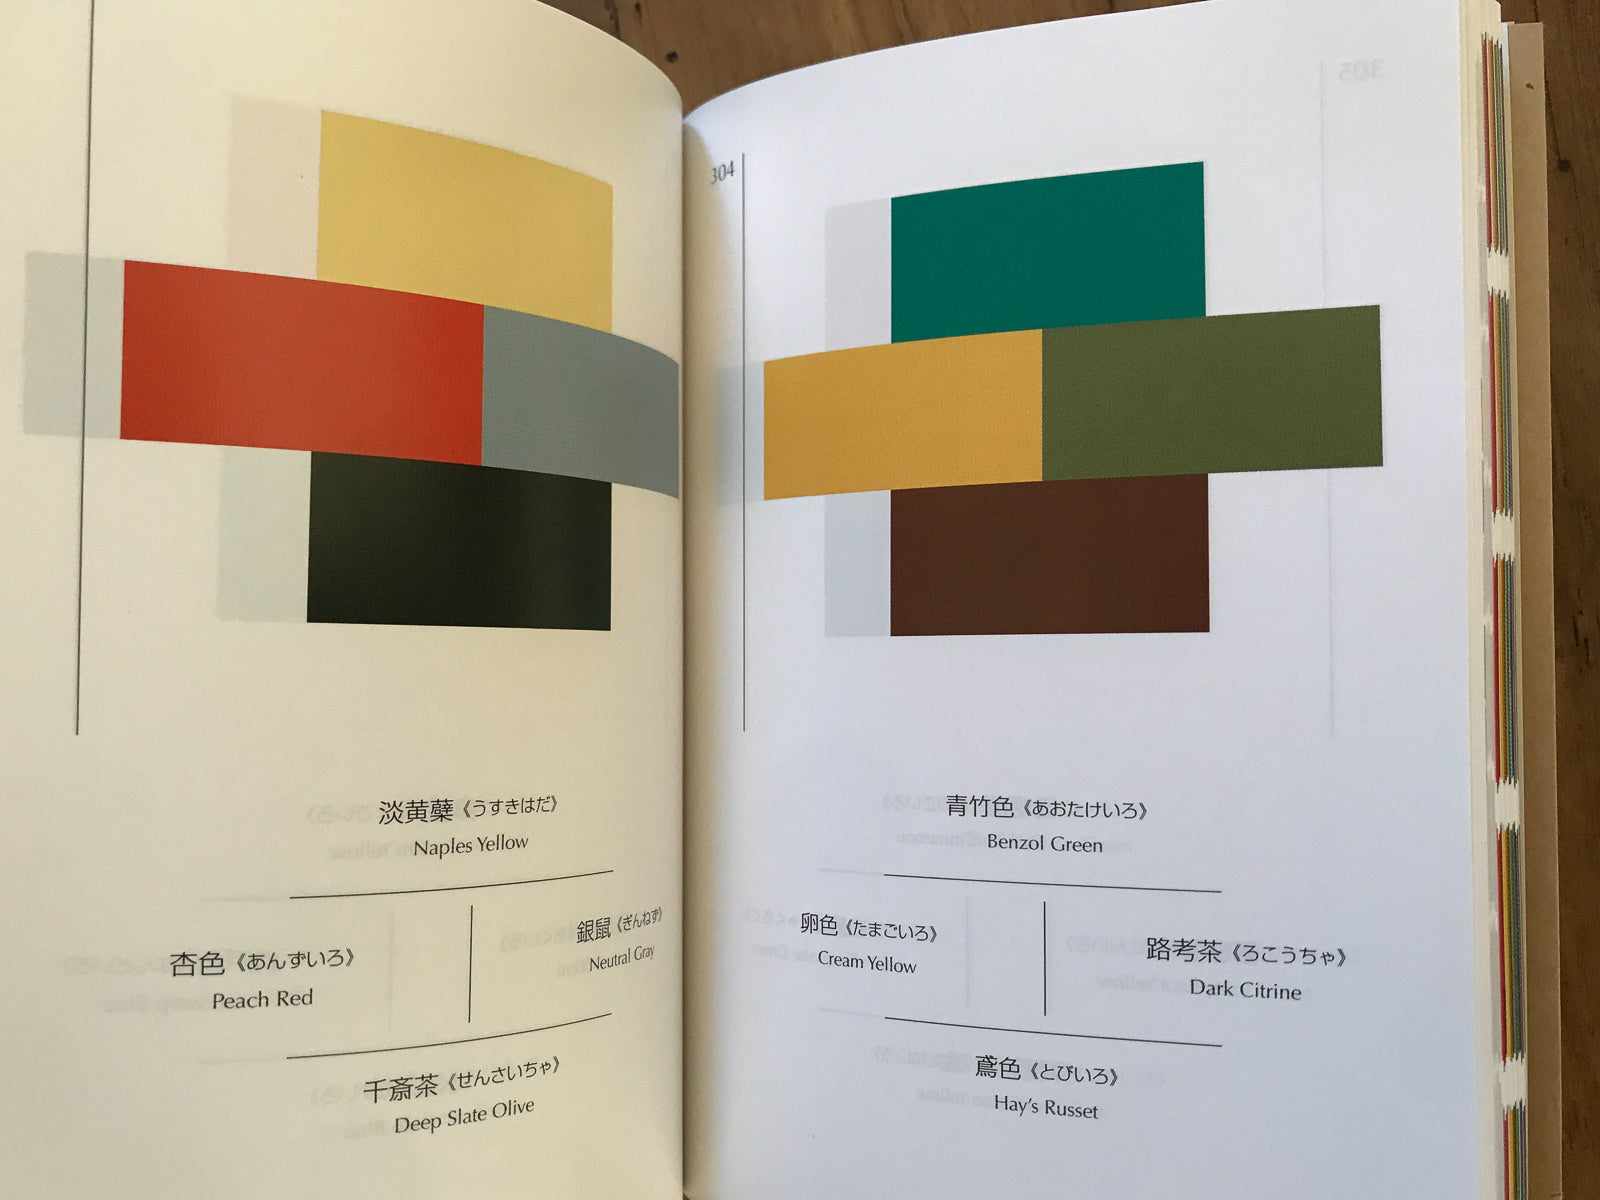 A Dictionary of Colour Combinations